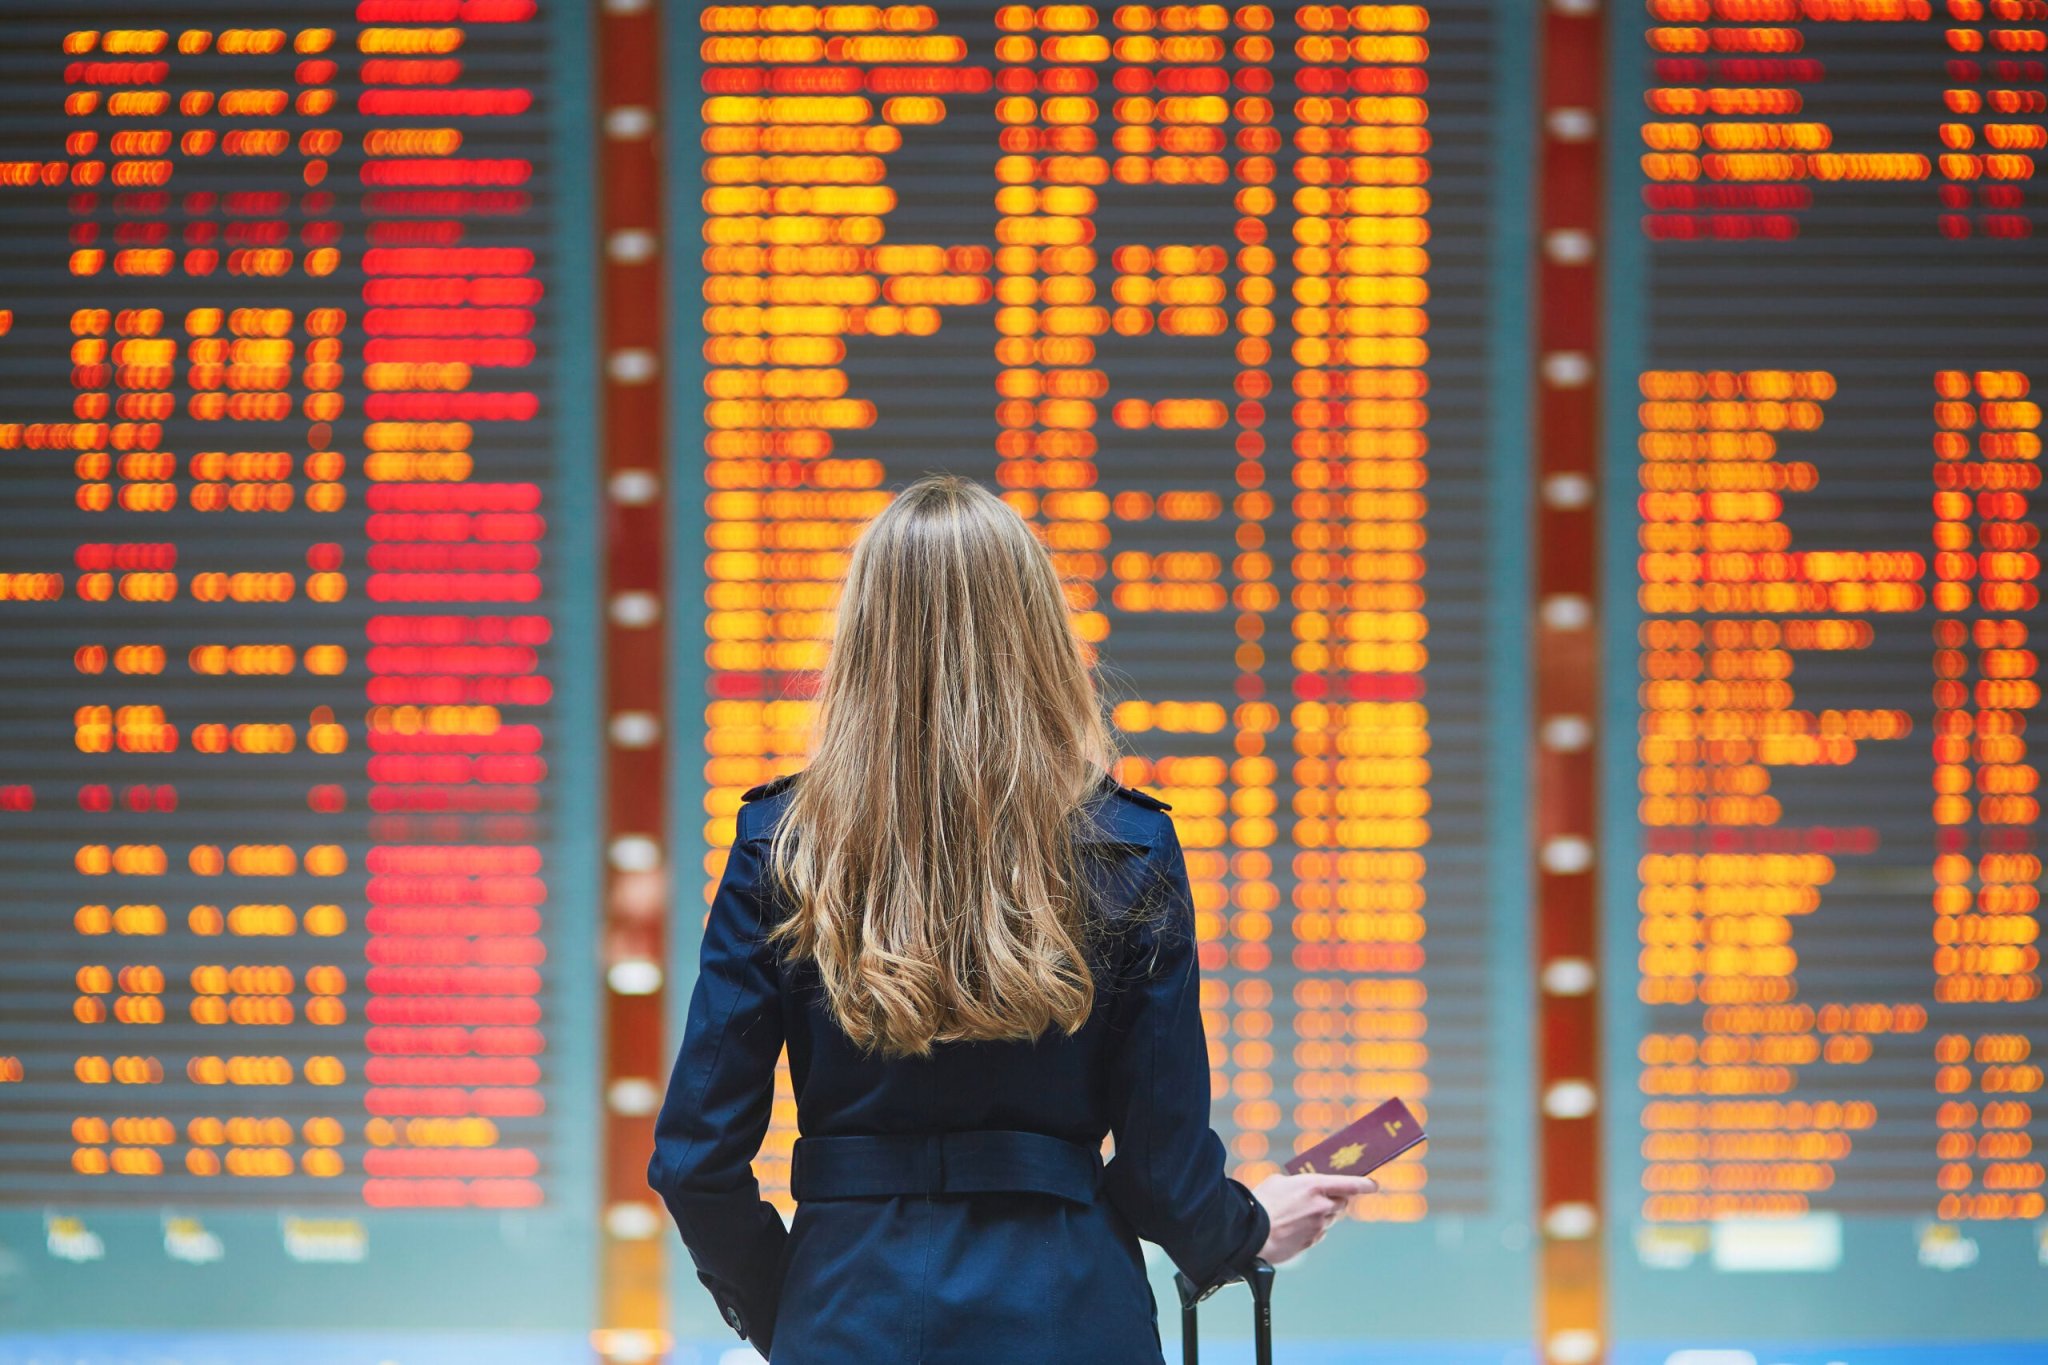 Flight canceled or delayed? Here’s what to do next